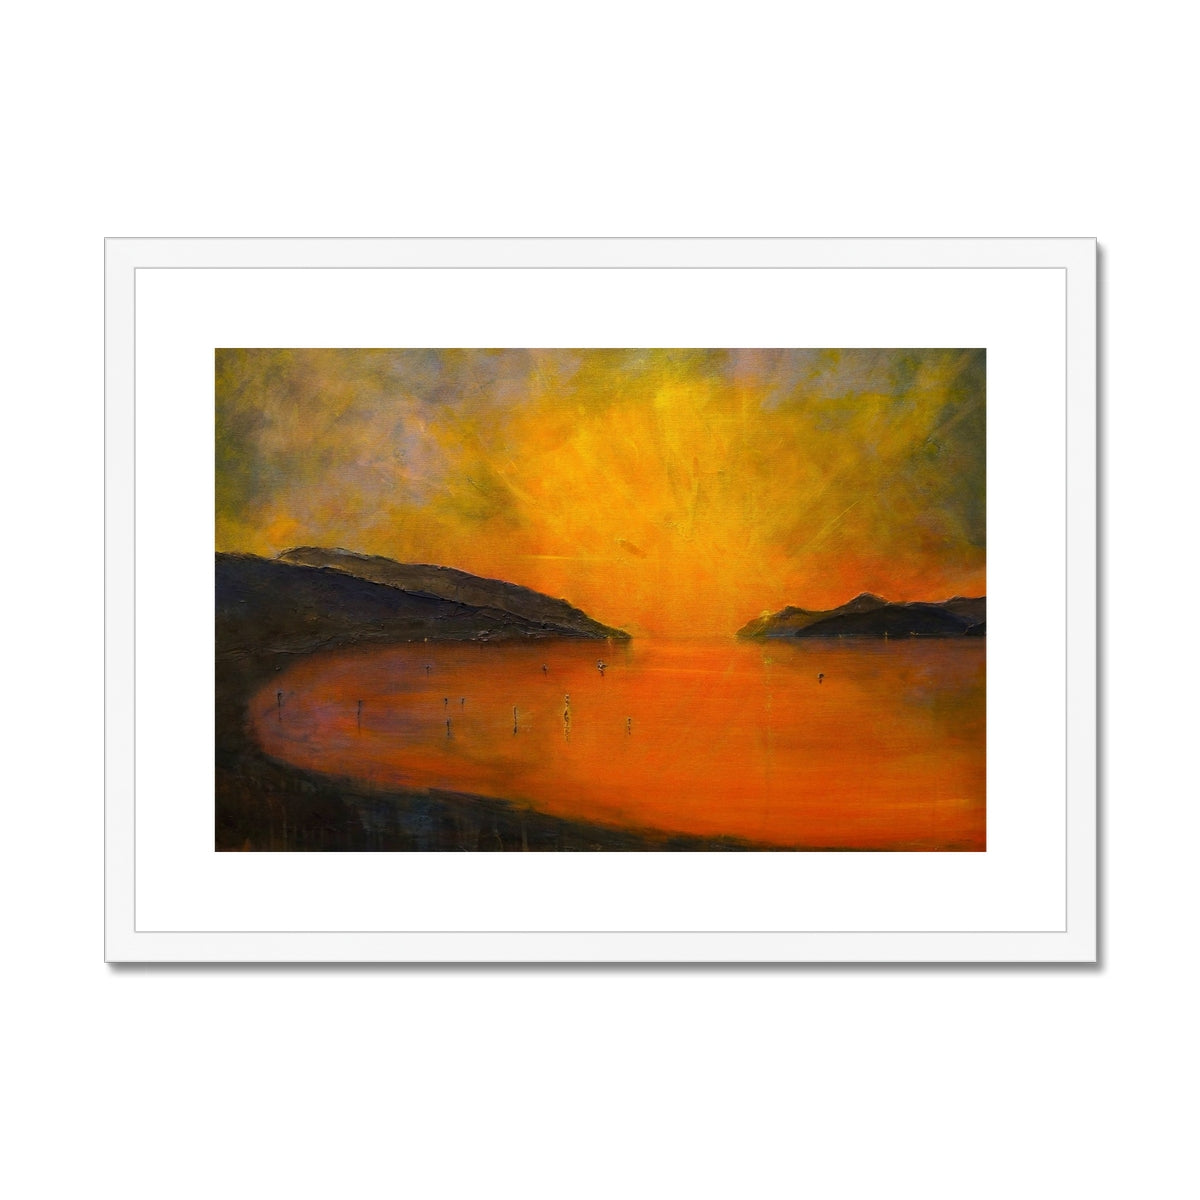 Loch Ness Sunset Painting | Framed & Mounted Prints From Scotland-Framed & Mounted Prints-Scottish Lochs & Mountains Art Gallery-A2 Landscape-White Frame-Paintings, Prints, Homeware, Art Gifts From Scotland By Scottish Artist Kevin Hunter